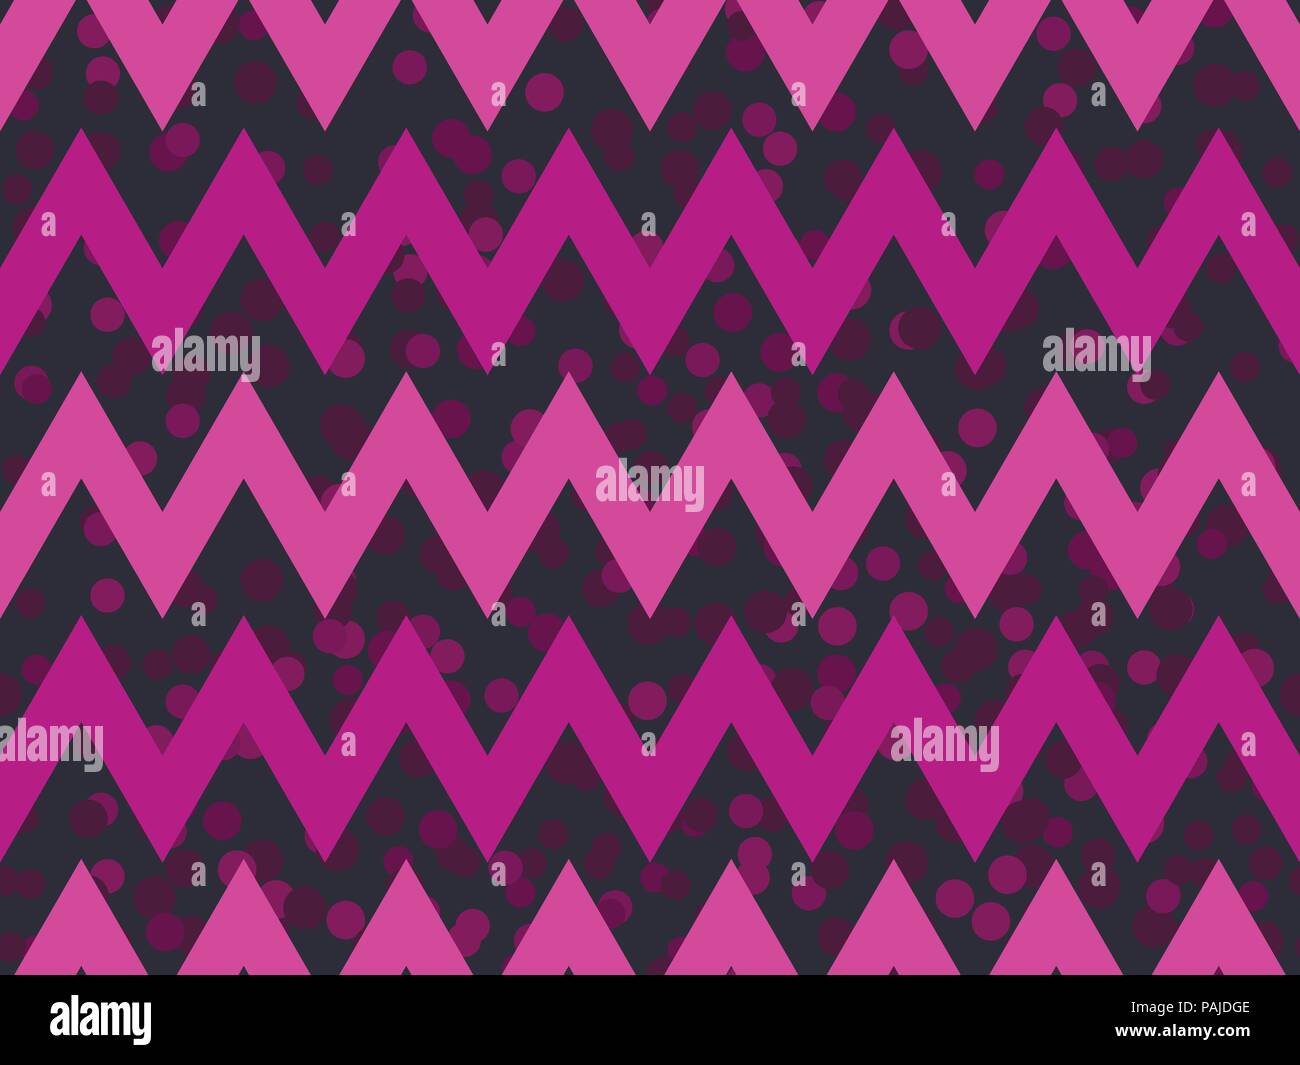 zag photography Dots - images pattern zig chevron and Alamy stock hi-res